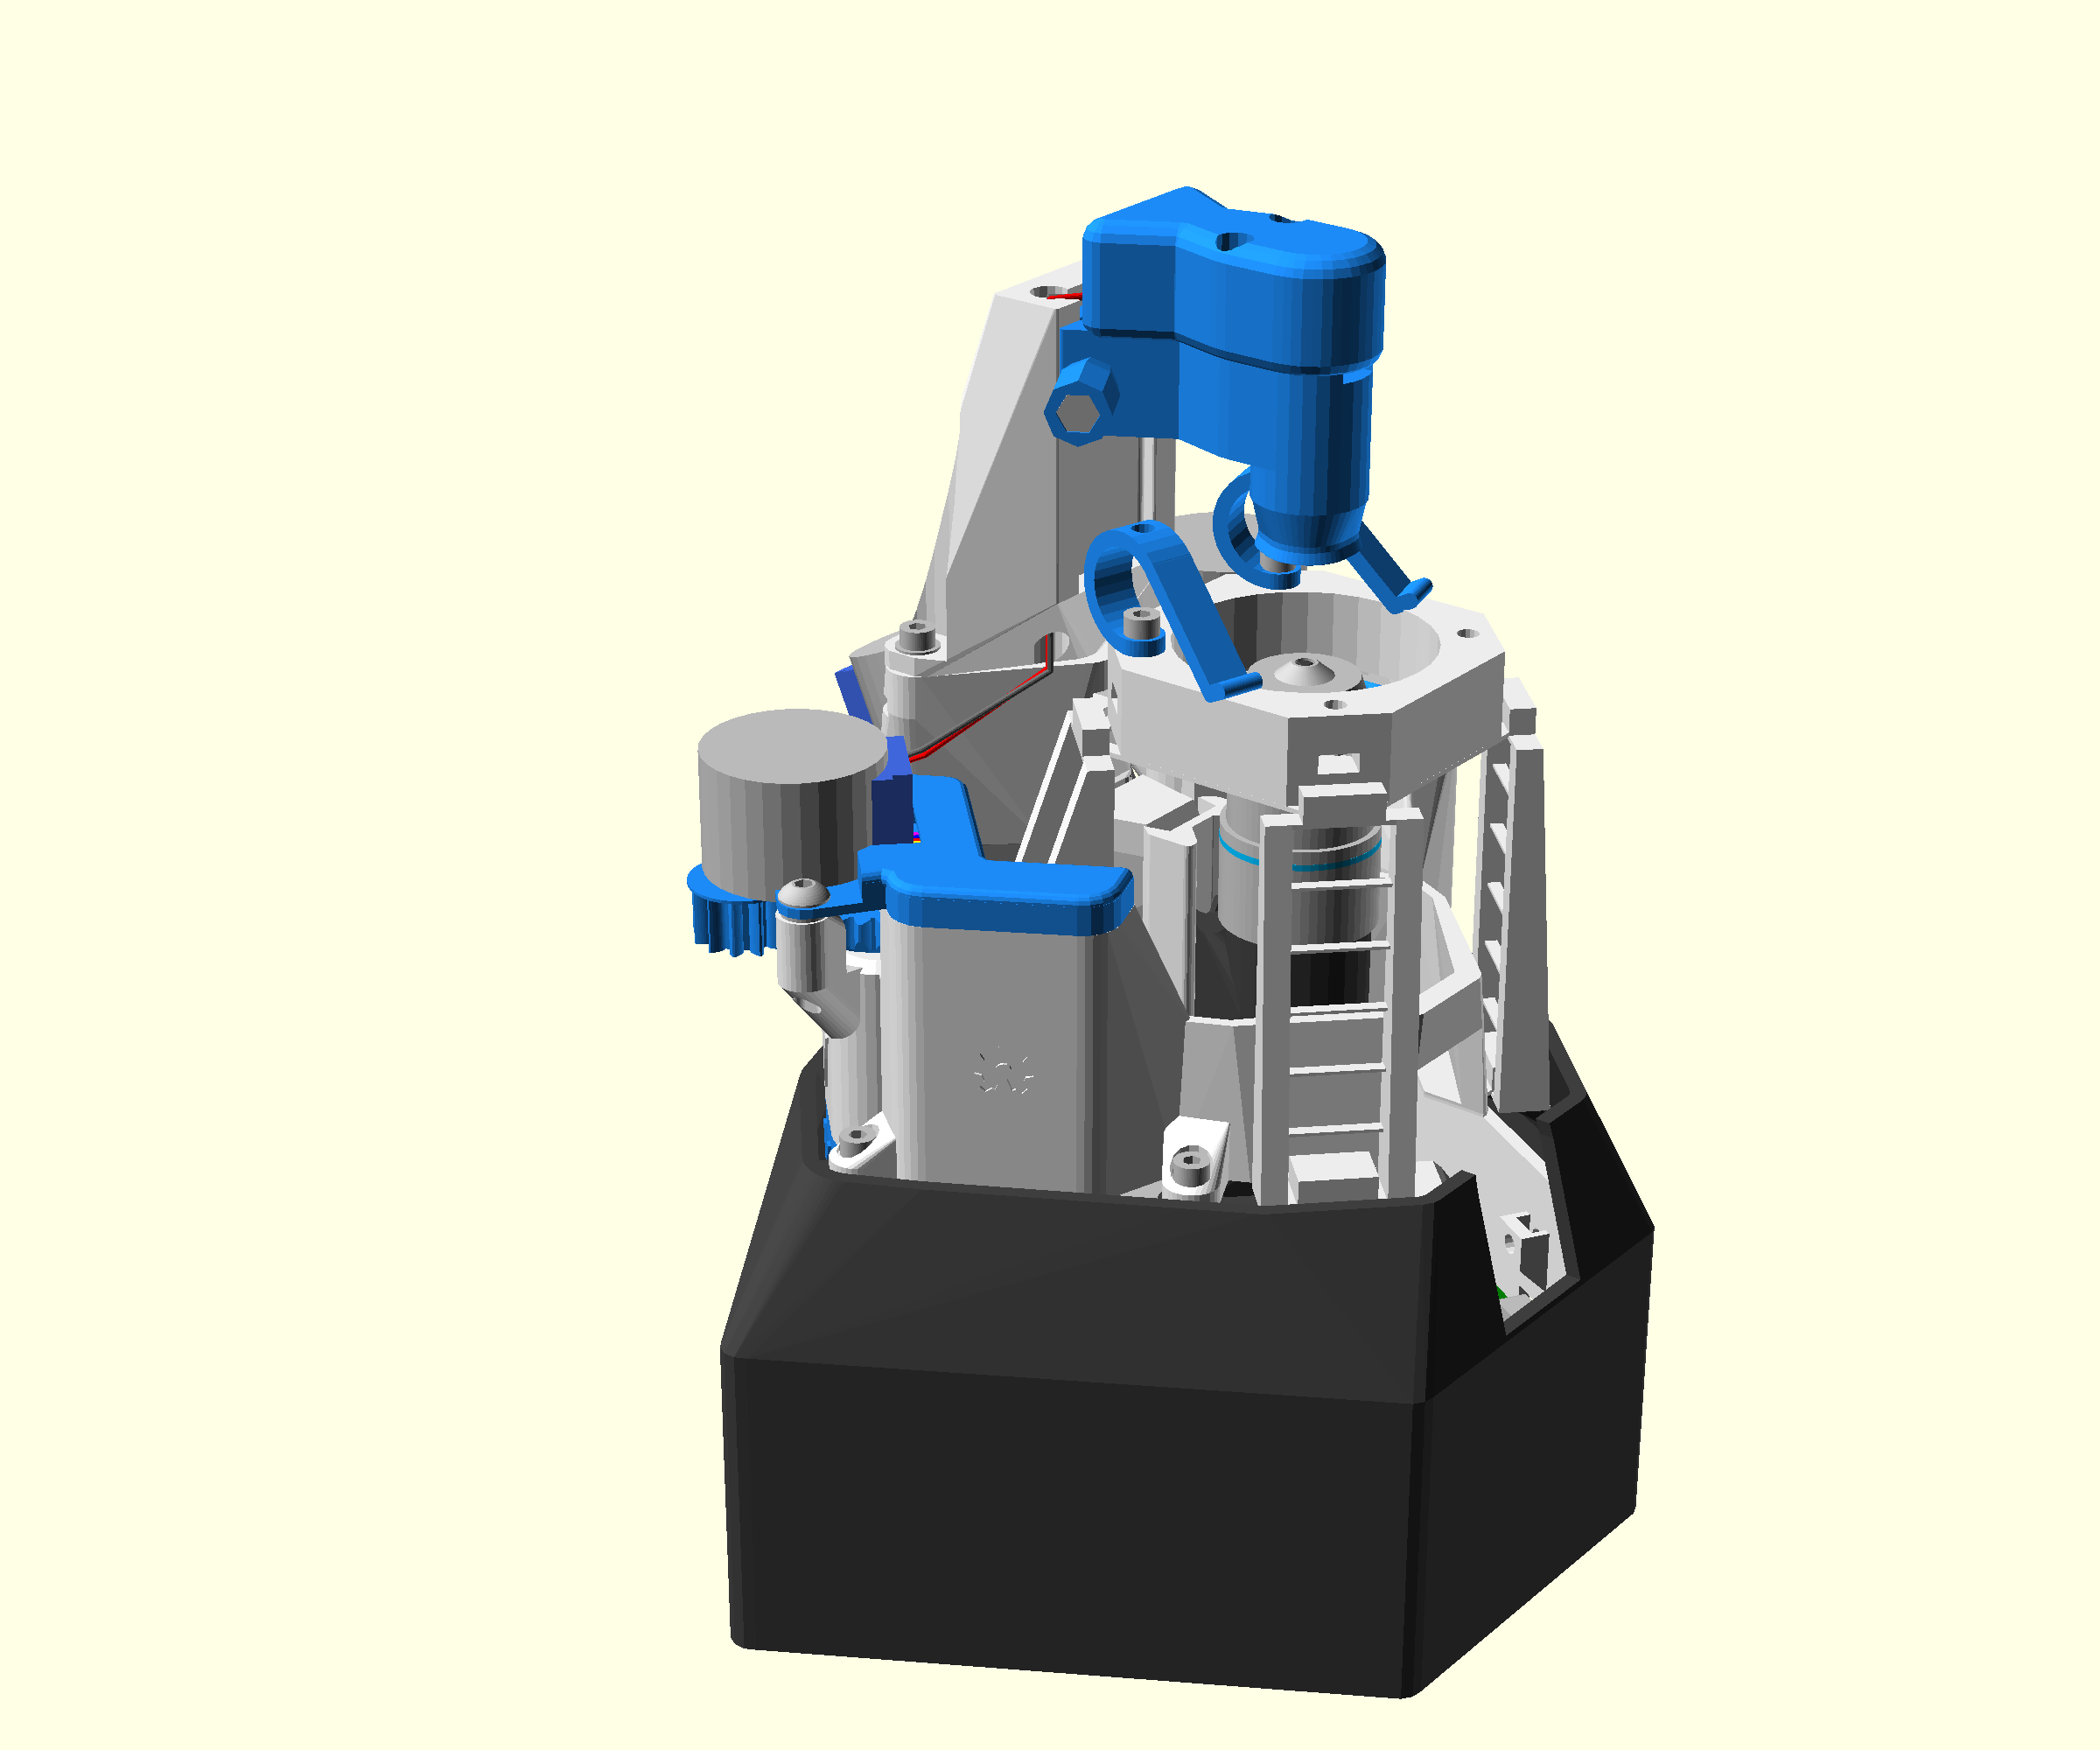 A render of the completed microscope